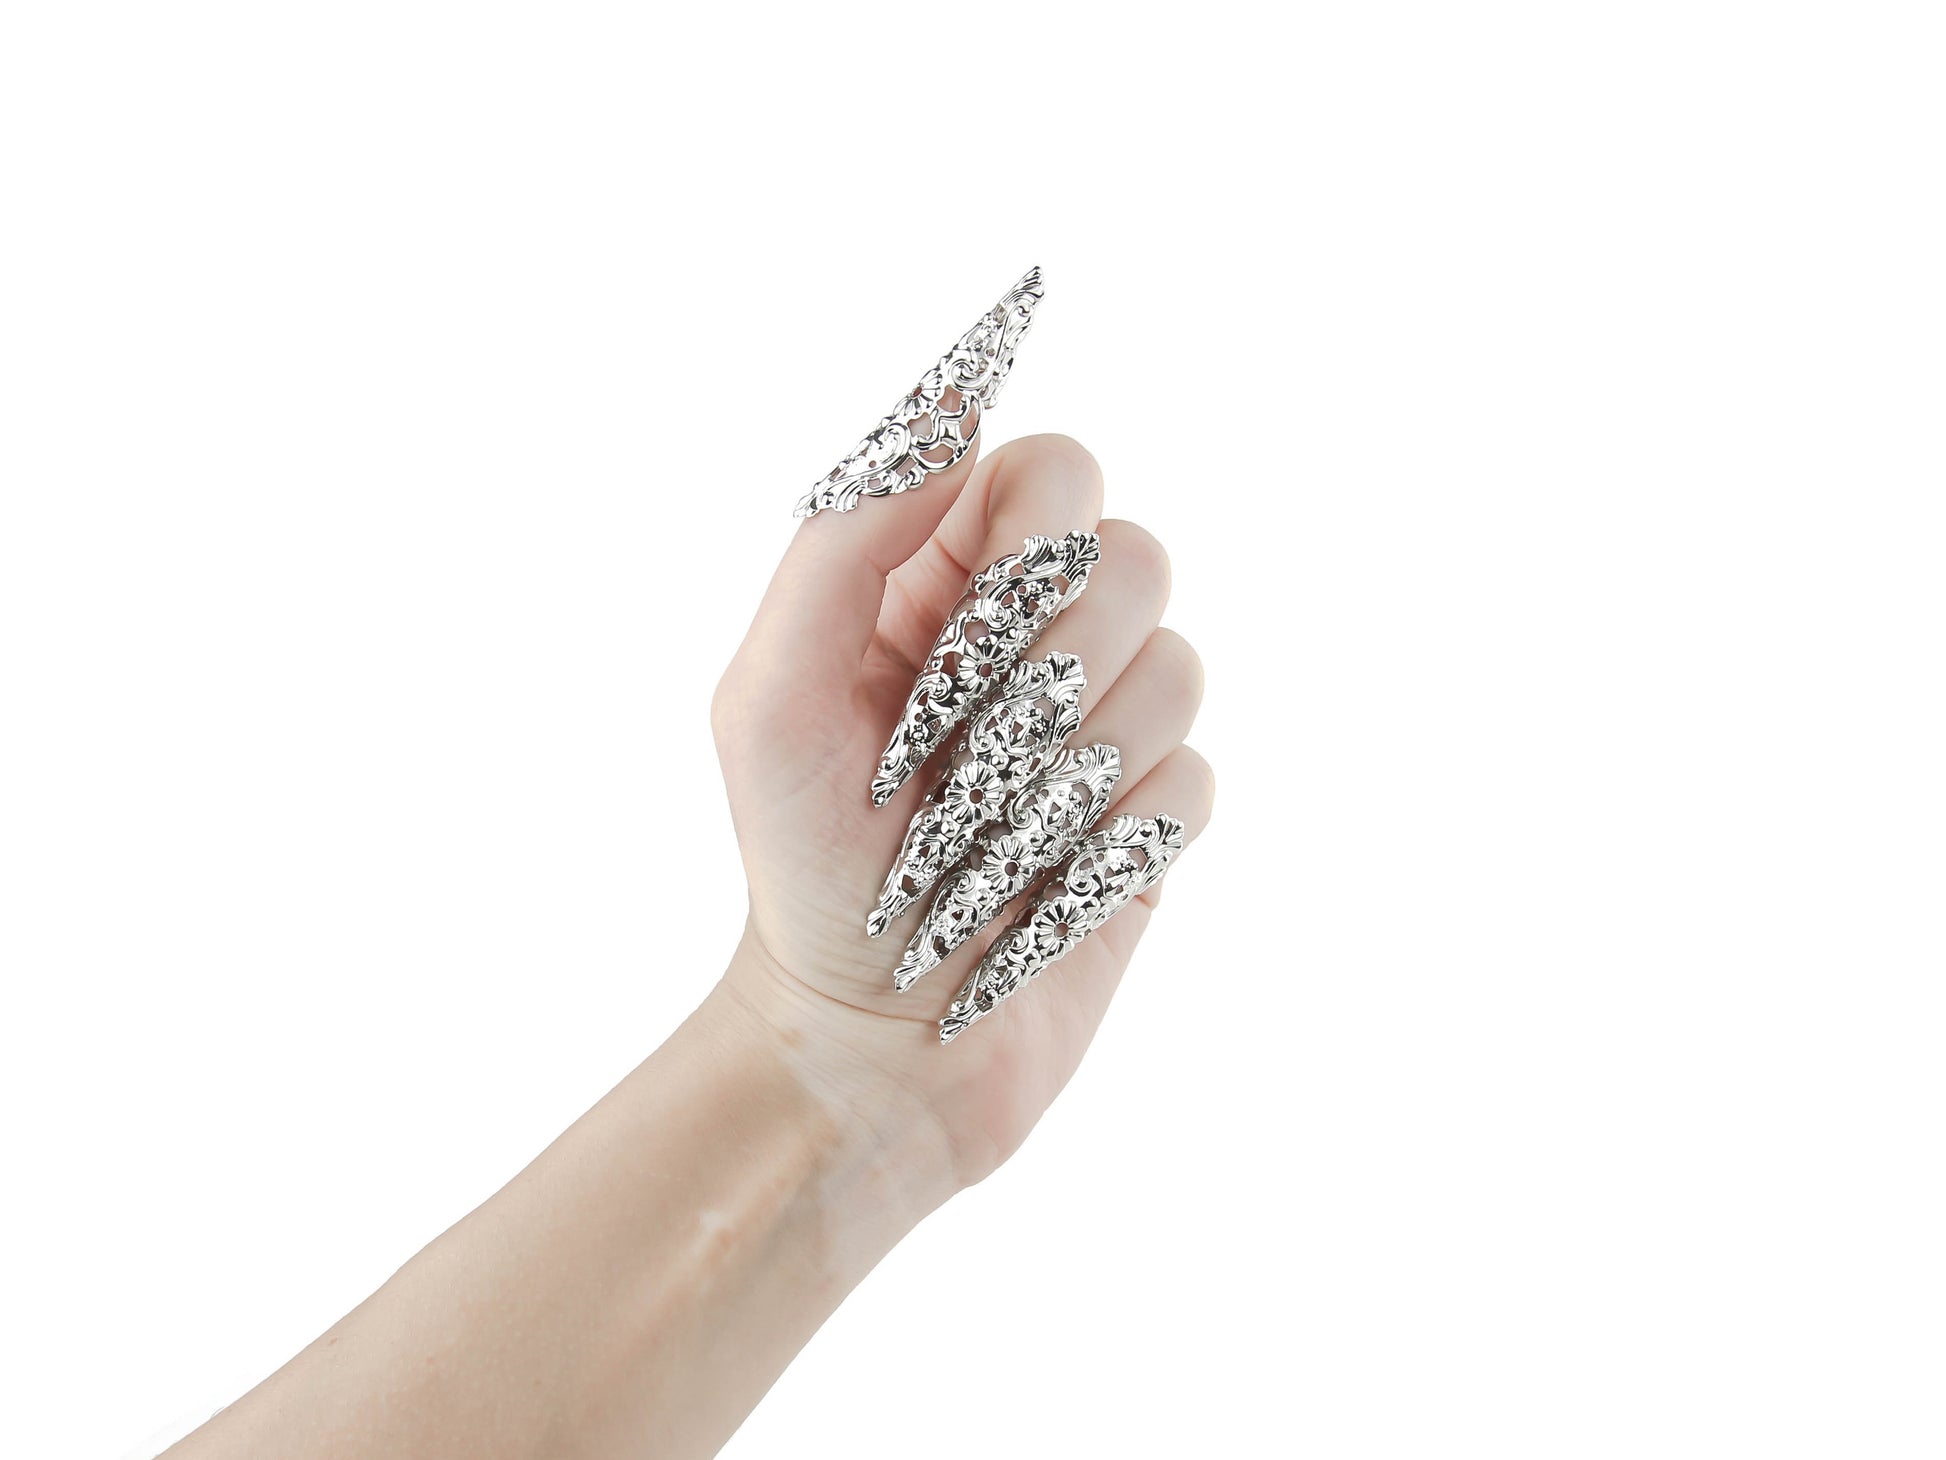 Striking goth nail rings, or claws, from Myril Jewels, perfect for a dark avant-garde look. These silver filigree claws are a statement of neo-gothic style, suited for Halloween, edgy everyday wear, or as a goth girlfriend gift, embracing the whimsigoth and witchcore trends.